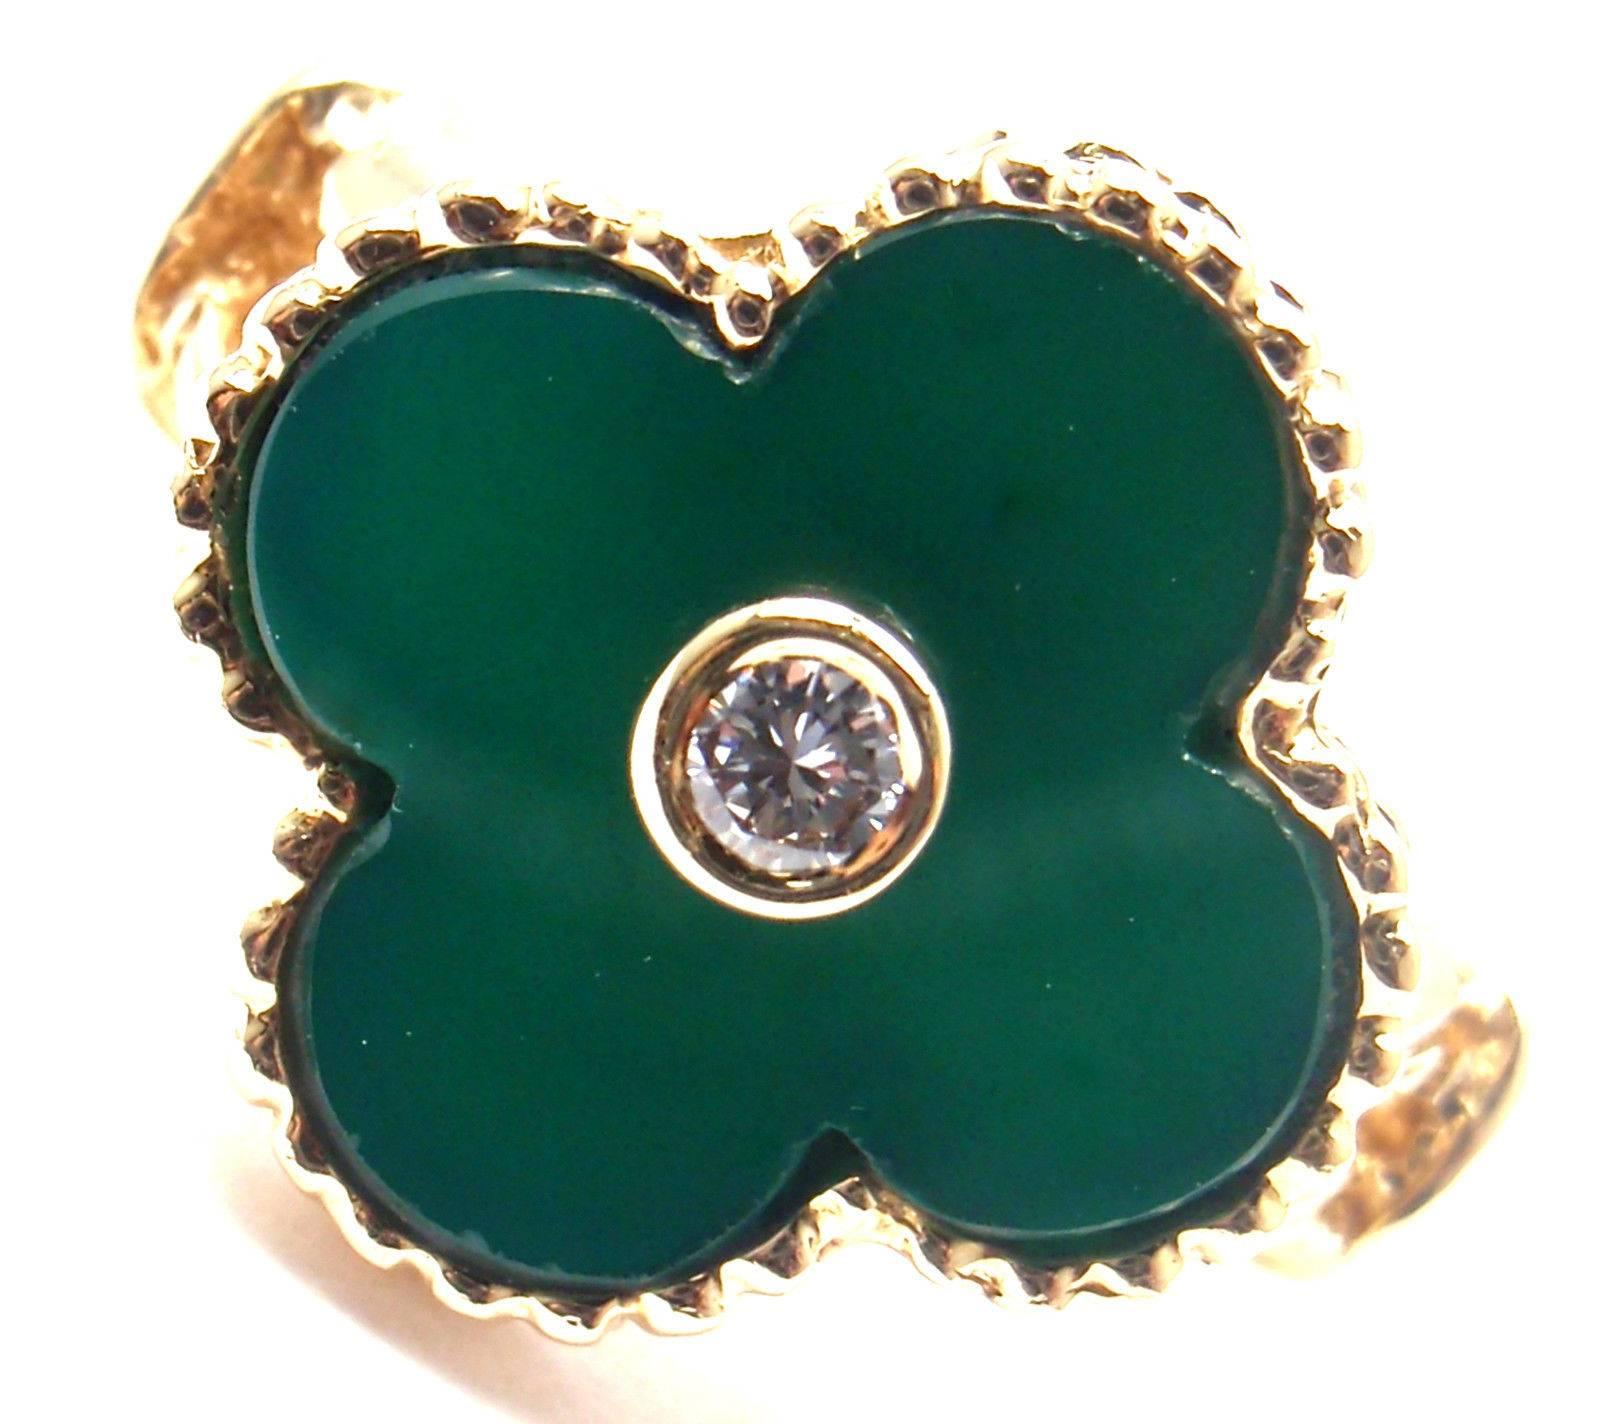 Van Cleef & Arpels Vintage Alhambra 18k Yellow Gold Diamond Green Chalcedony Ring.
With 1 Round brilliant cut diamond .06ct F/VS1 Alhambra cut Green Chalcedony 
Details: 
Size - 5 
Width: 15mm 
Weight: 5.4 grams
Stamped Hallmarks: VCA NY 18k